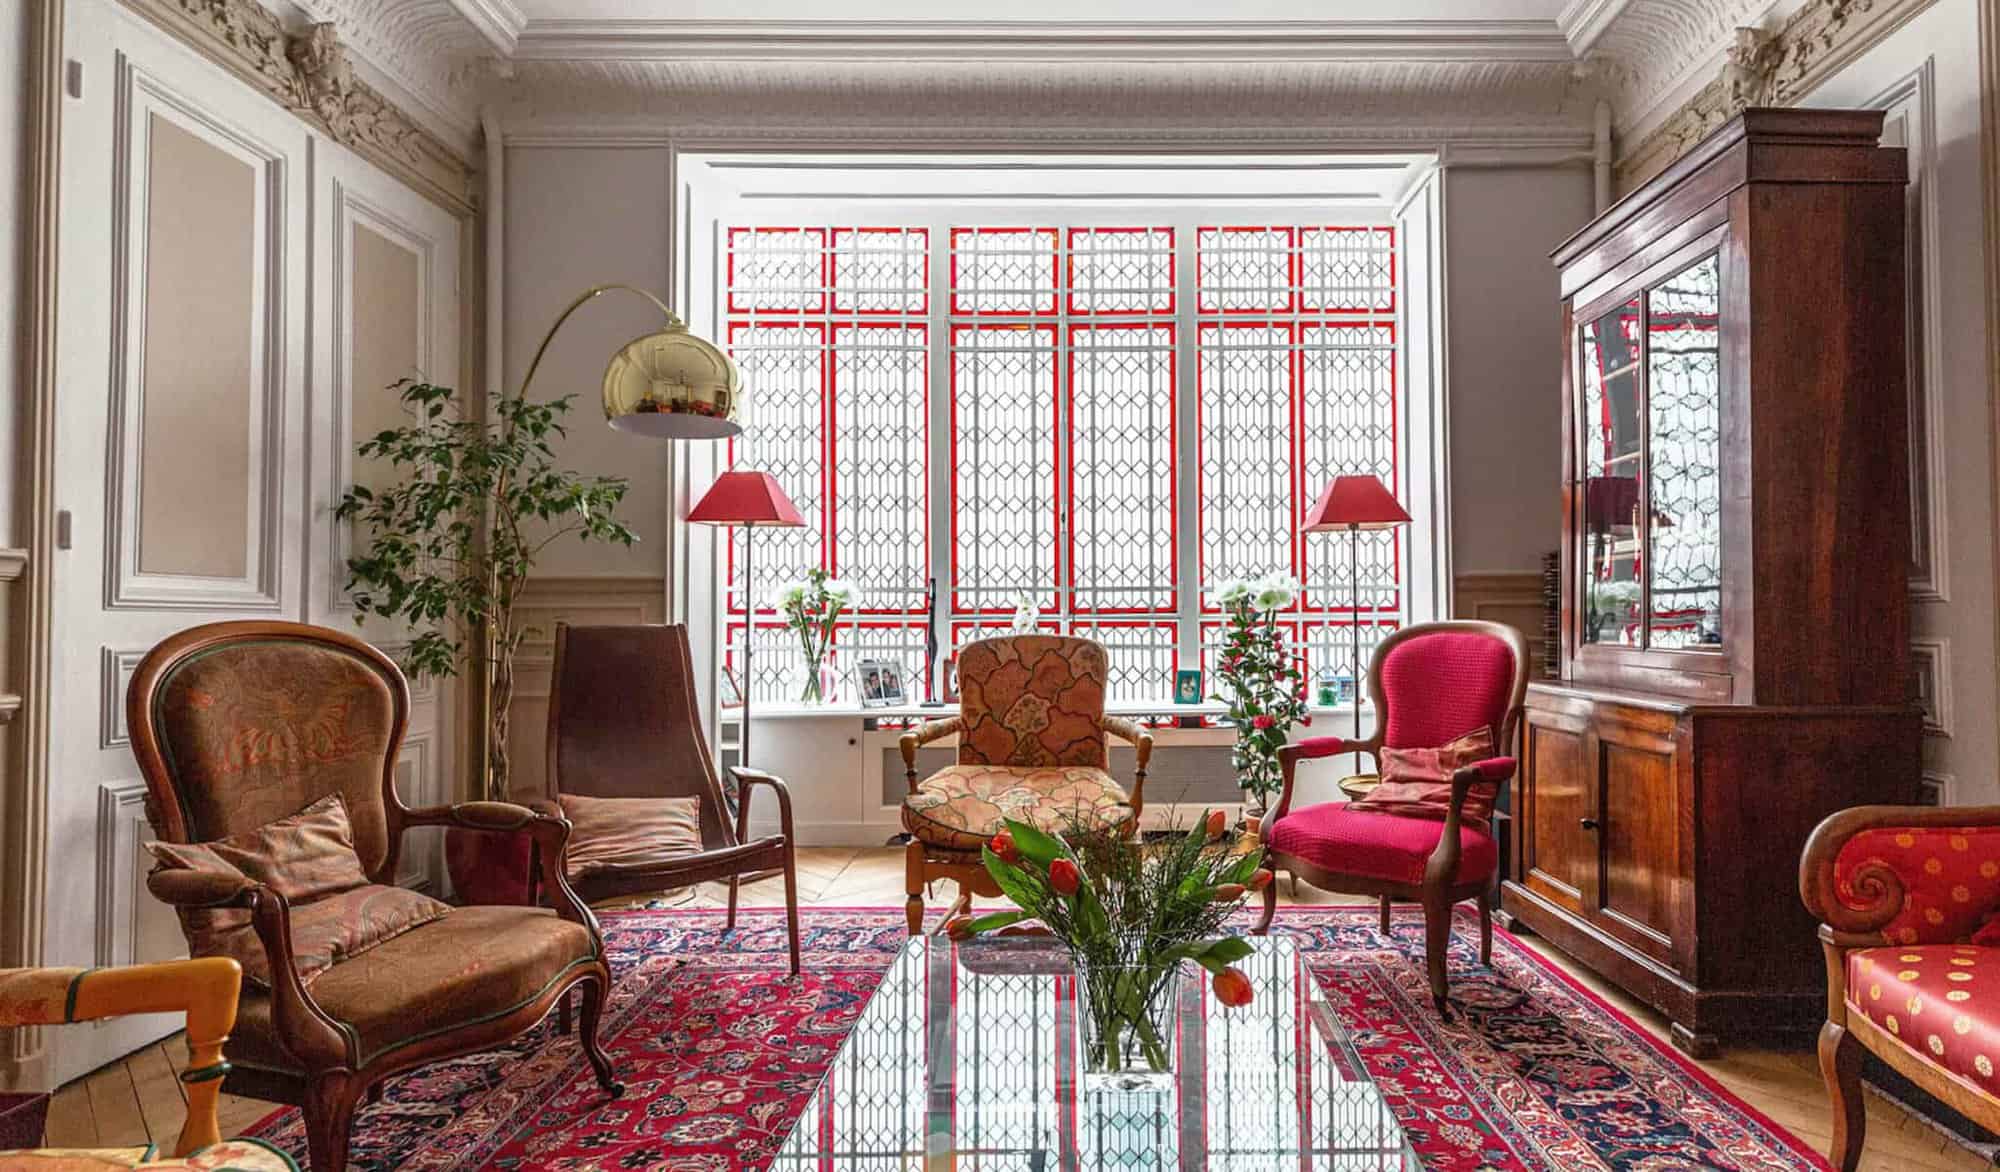 A Parisian living room with red windows, red Persian carpet, wooden chairs with red cushions, and a tall wooden cabinet.